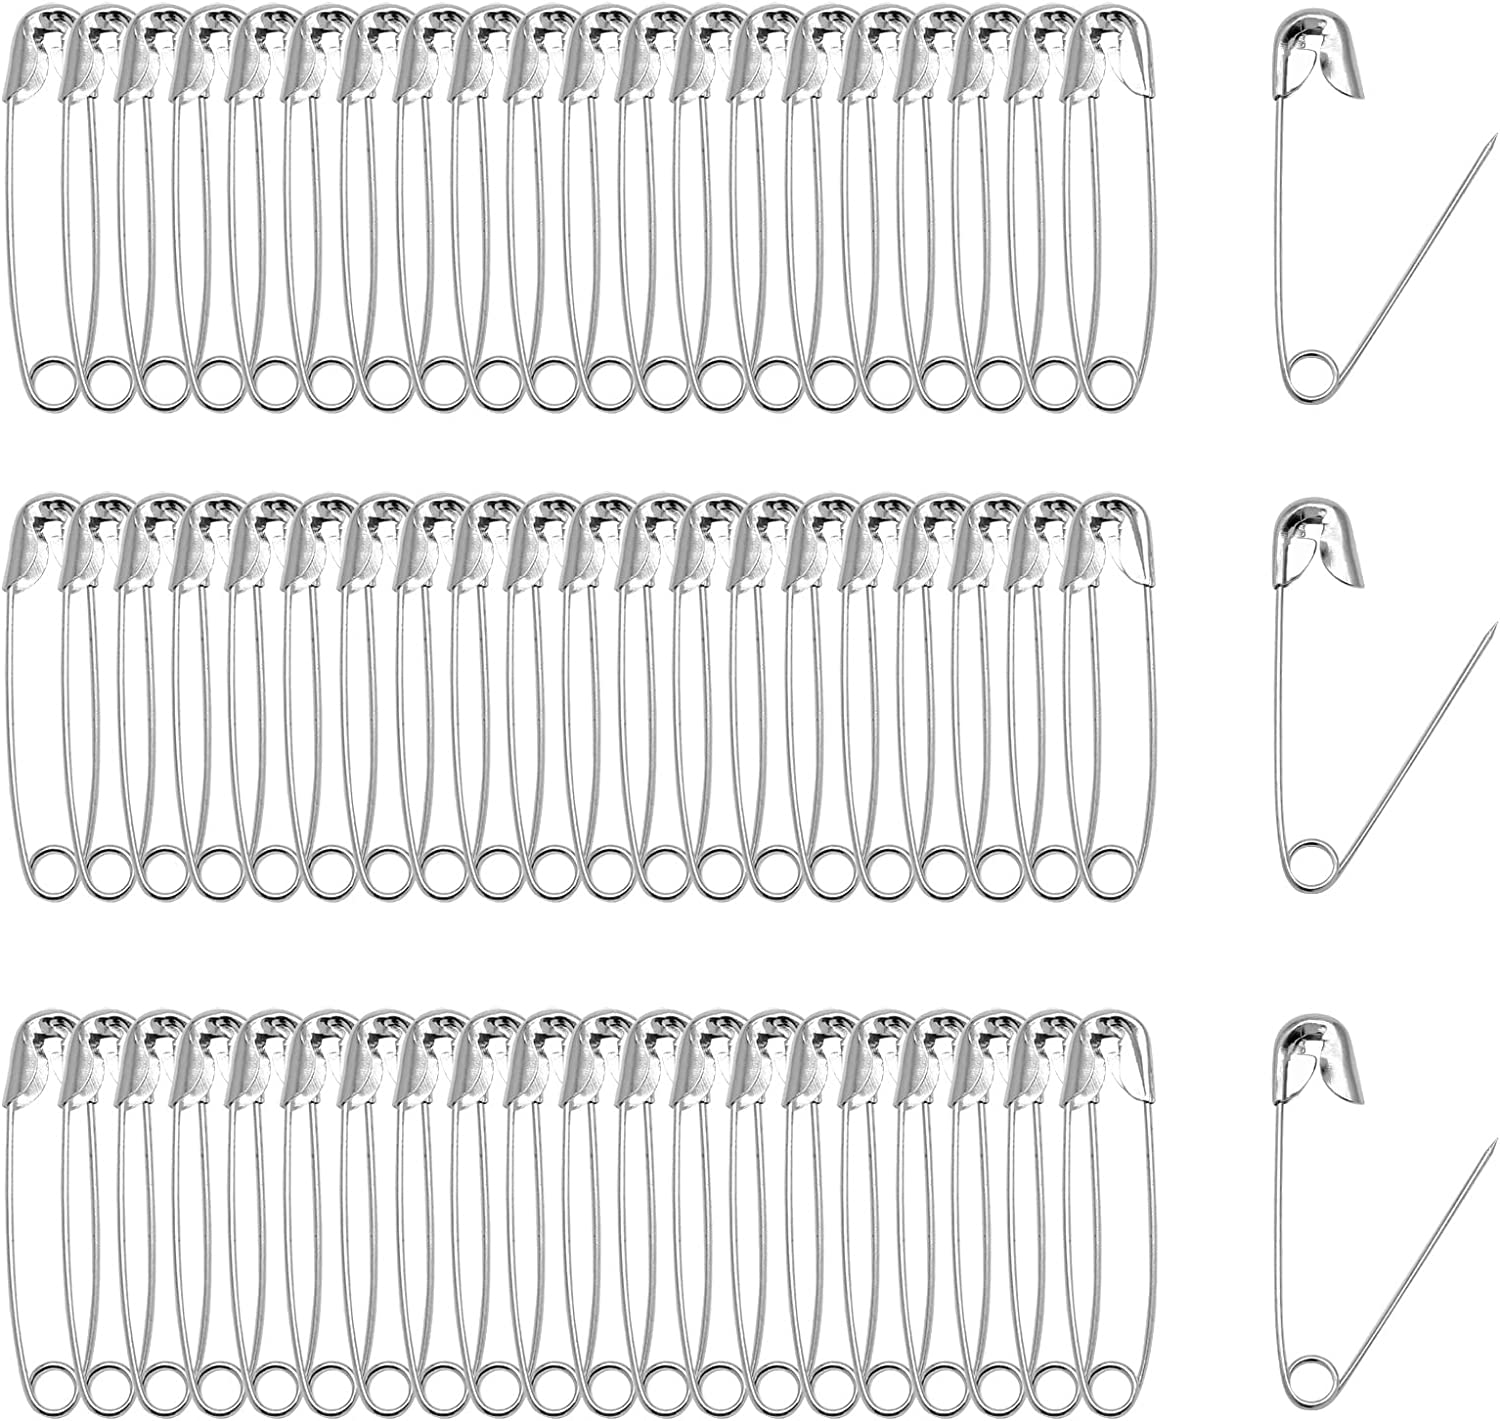 TSHD 100 Pack Curved Safety Pins 1.5 inch Size 2 for Quilting Sewing,Basting Pins